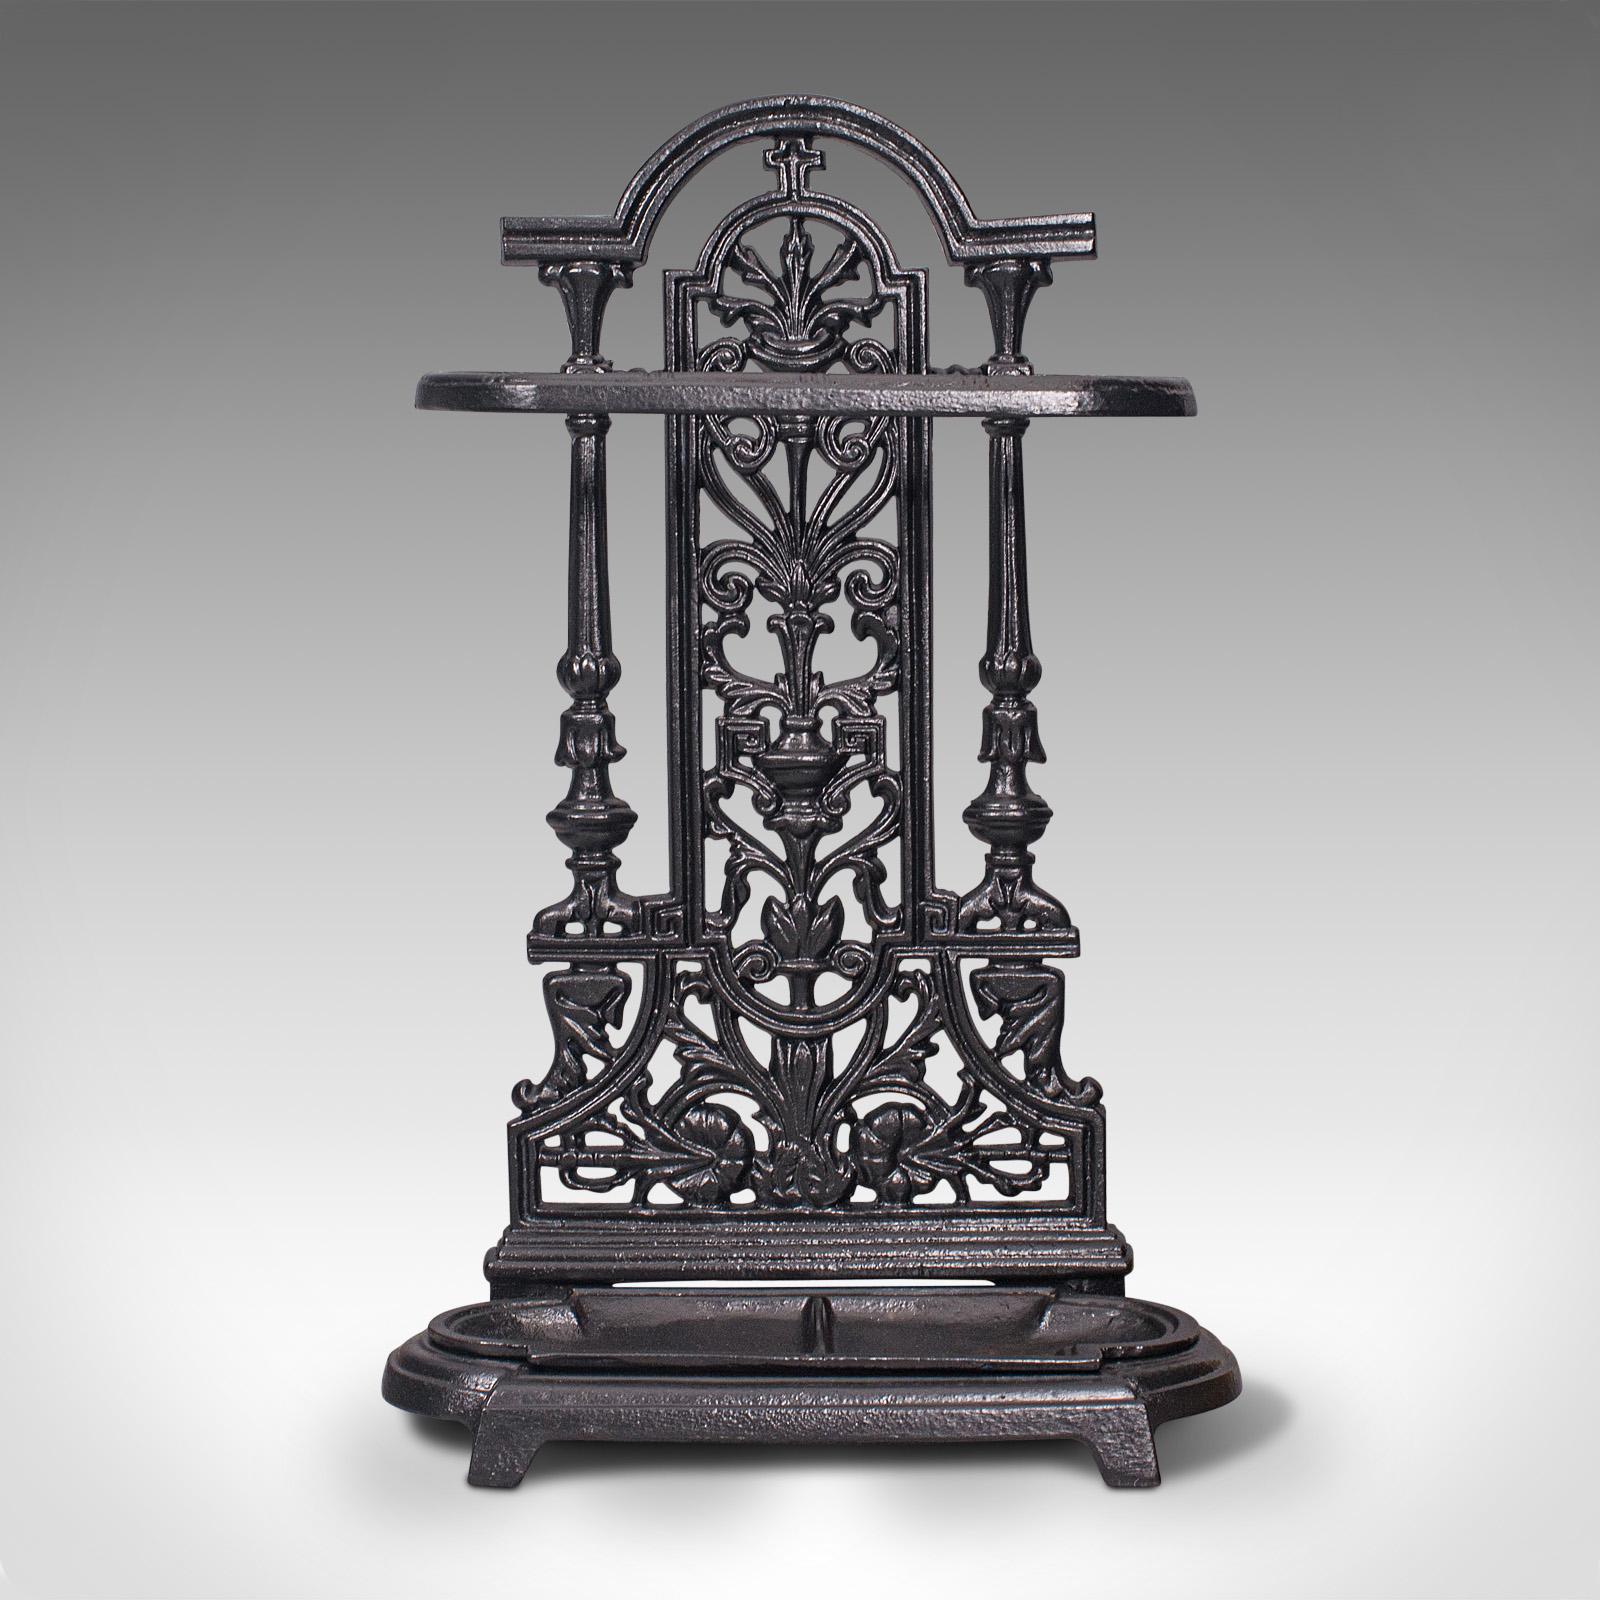 This is a vintage stick stand. An English, cast iron hallway umbrella rack displaying Victorian Revival taste, dating to the mid 20th century, circa 1950.

Attractive mid-century stand with appealing Victorian overtones
Displays a desirable aged